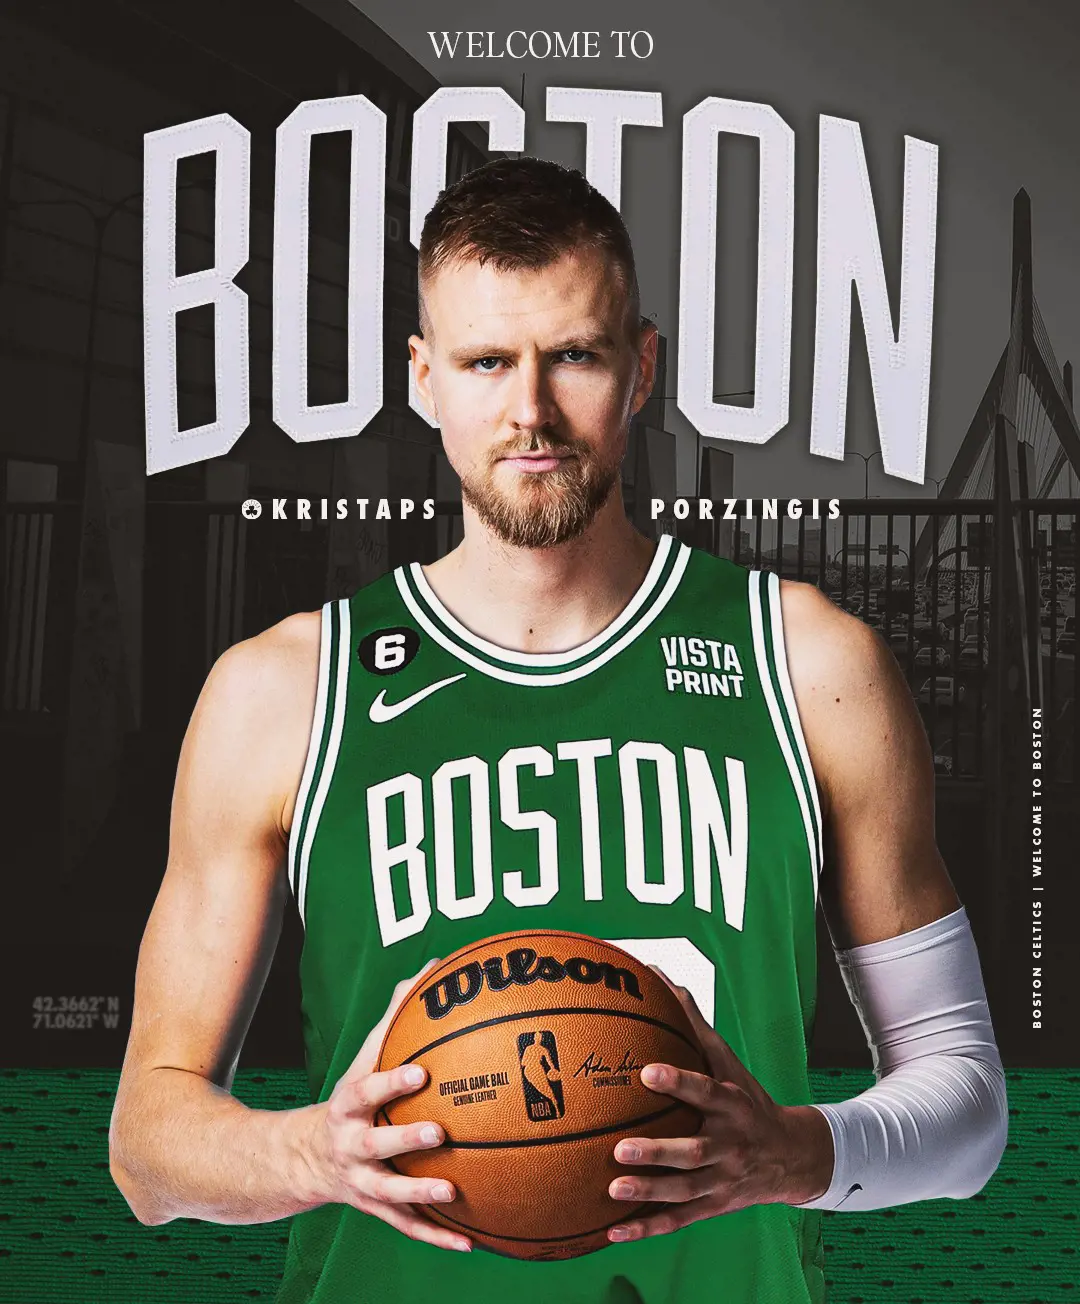 Kristaps Porzingis welcomed by the Celtics in the official fb page